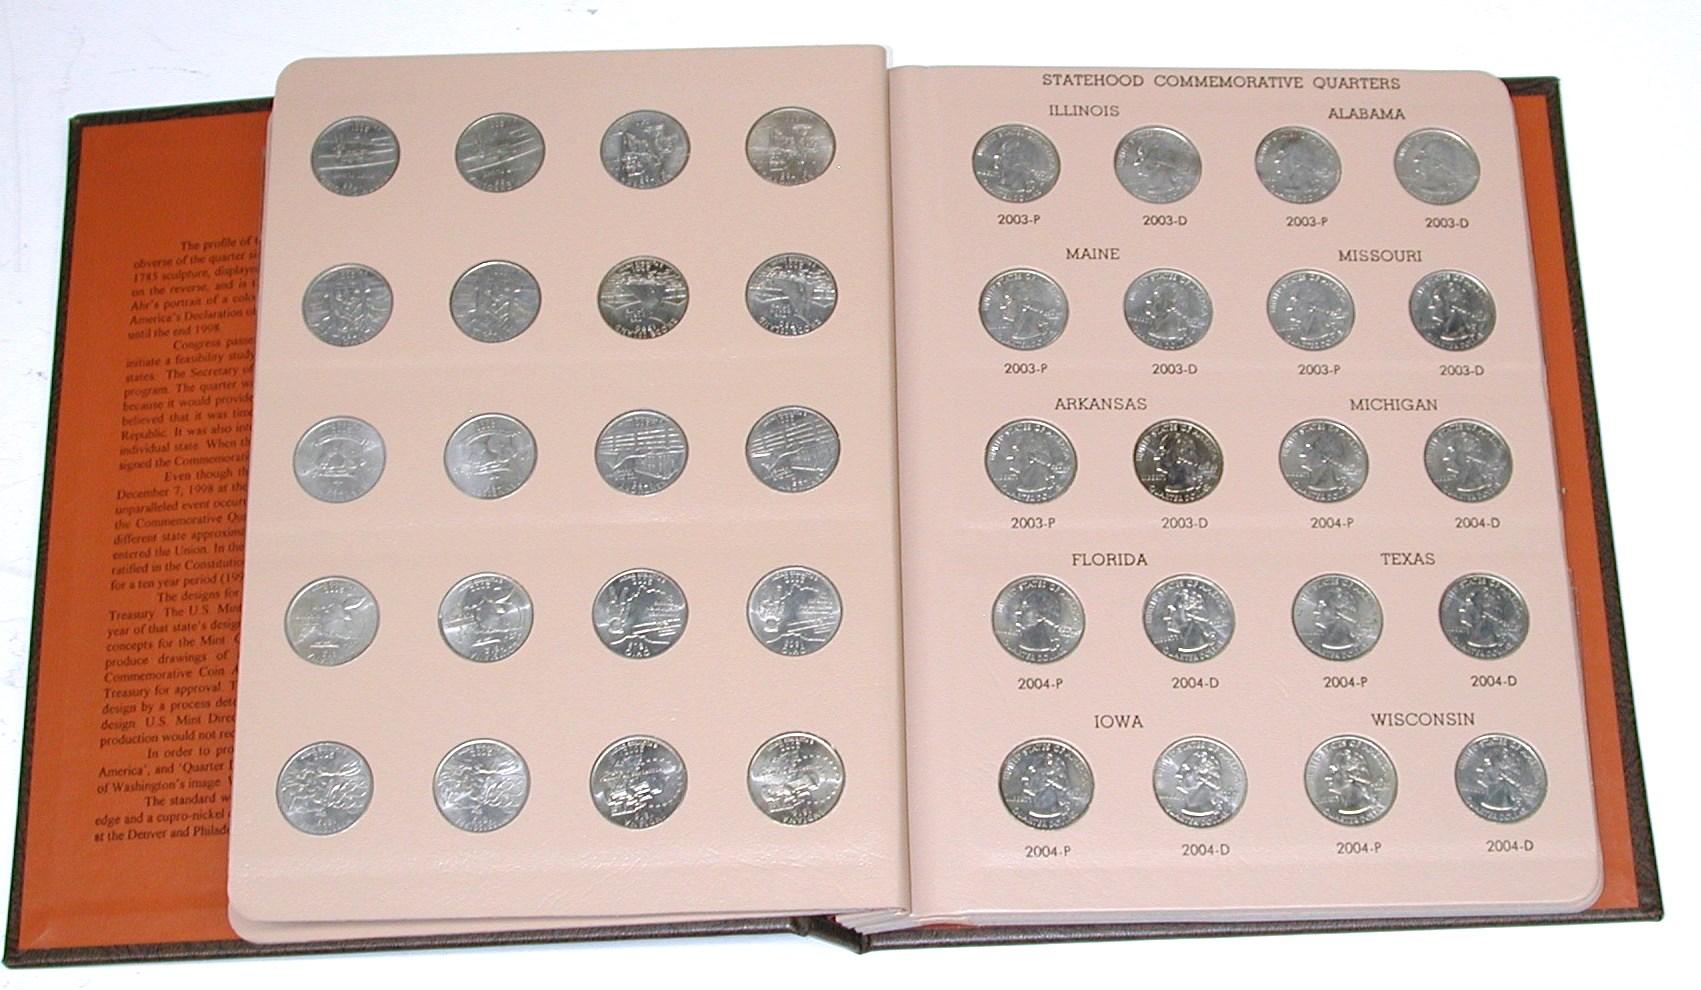 SET of STATE QUARTERS (P & D) - 1999 to 2008 - 100 COINS